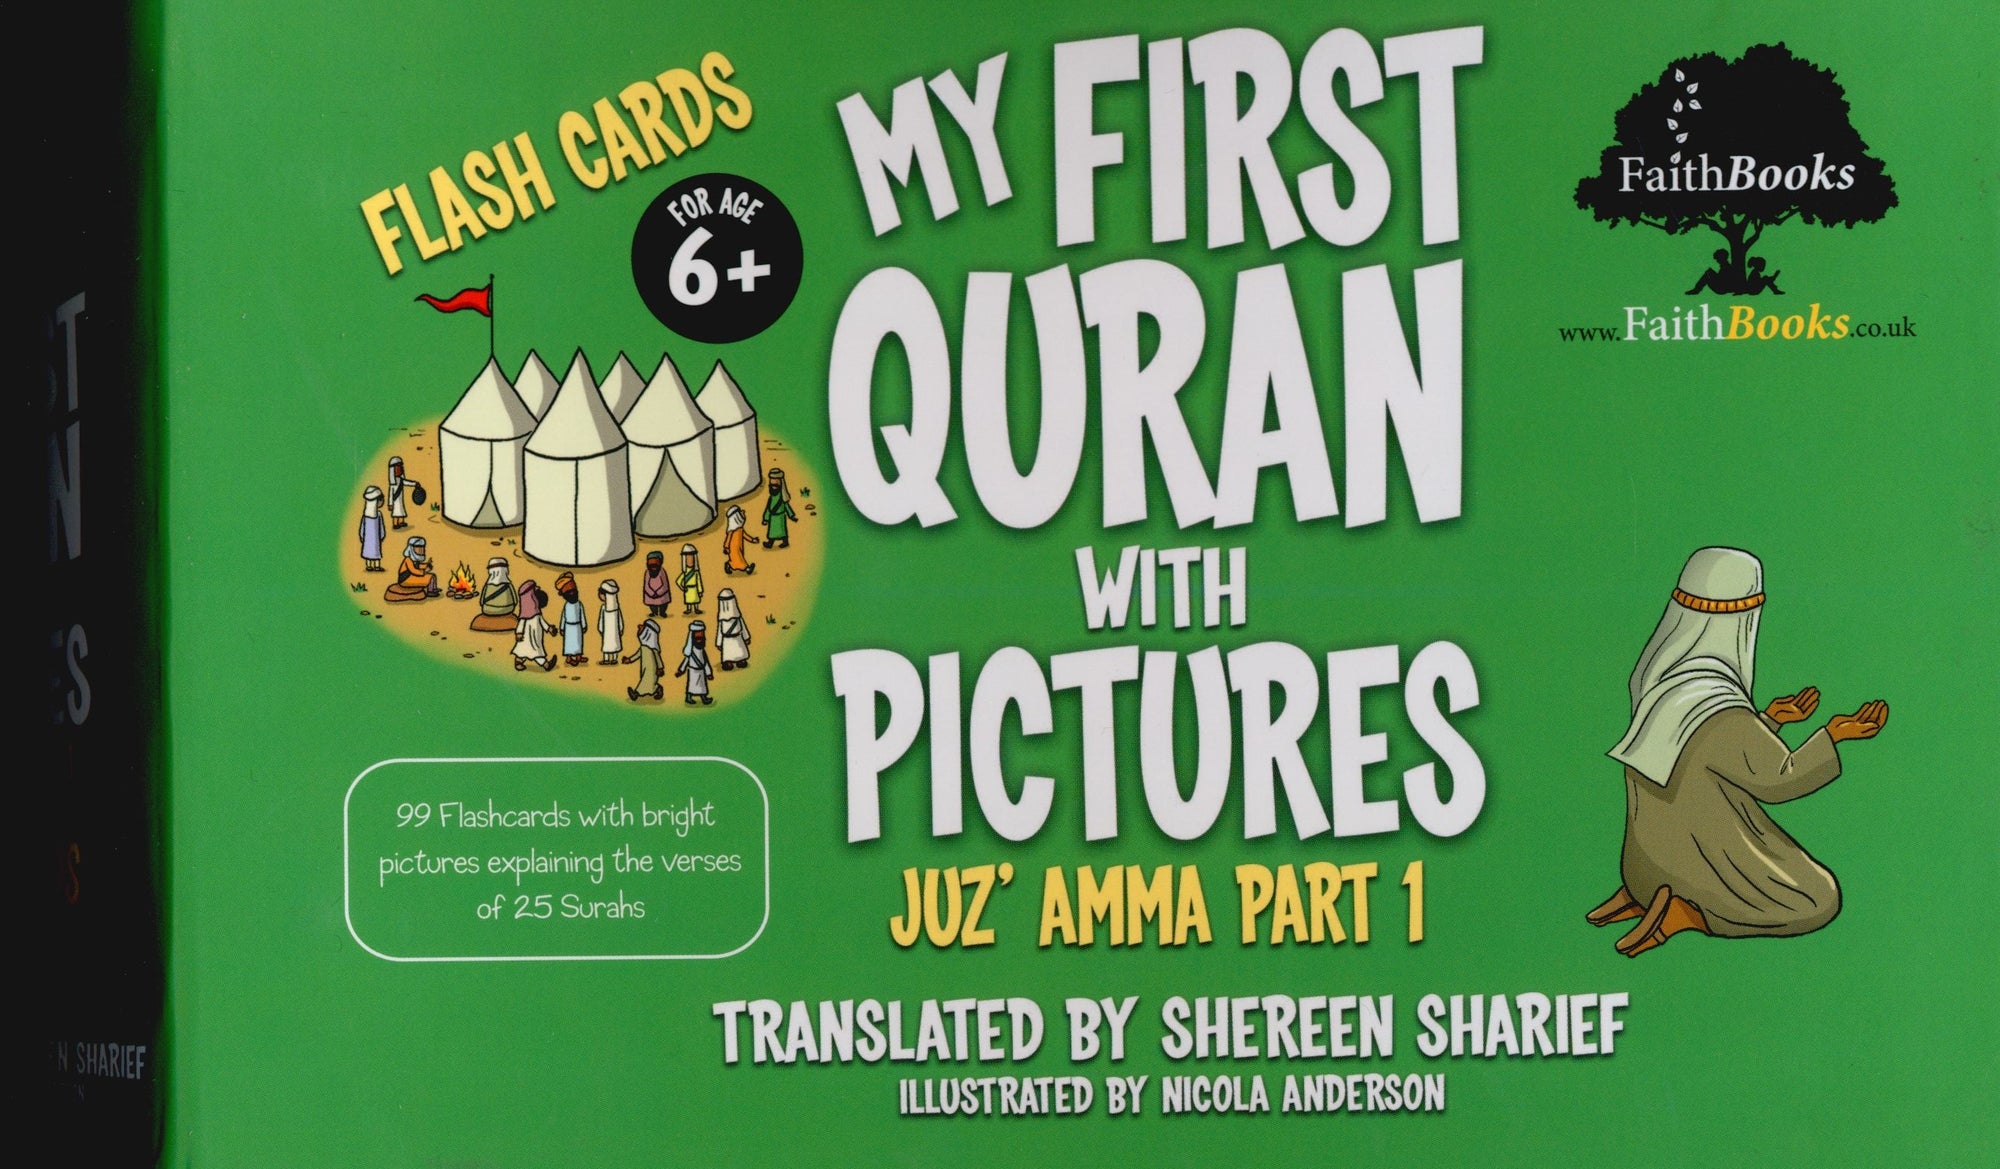 My First Quran With Pictures, Juz Amma Part 1 - Flash Cards